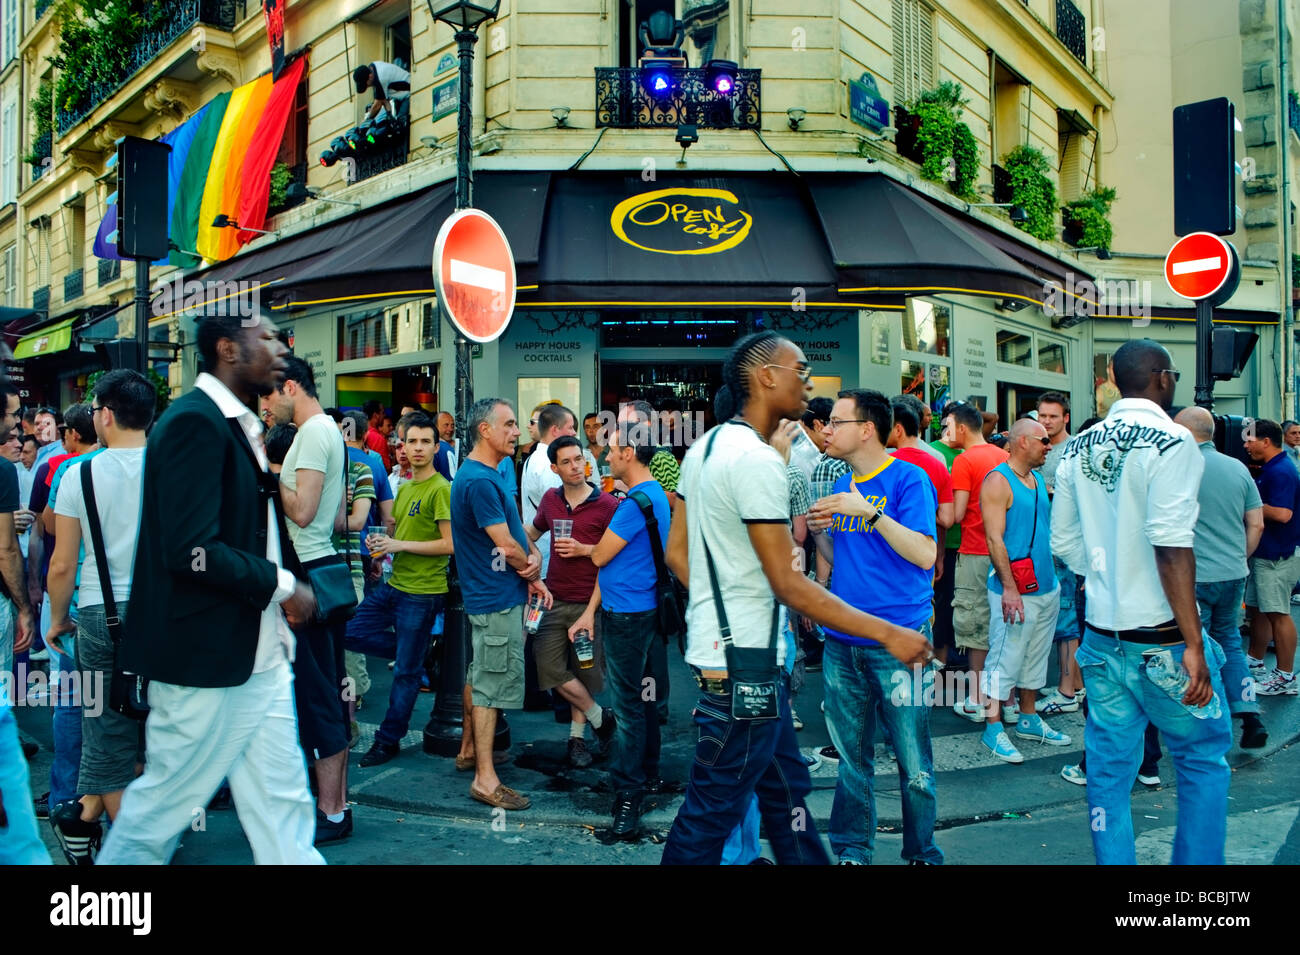 Paris France, Young French Men, Sharing Drinks at a Gay Bar in the Marais, The 'Open Cafe', Crowded Sidewalk Terrace, Outside front, archive photos, Stock Photo